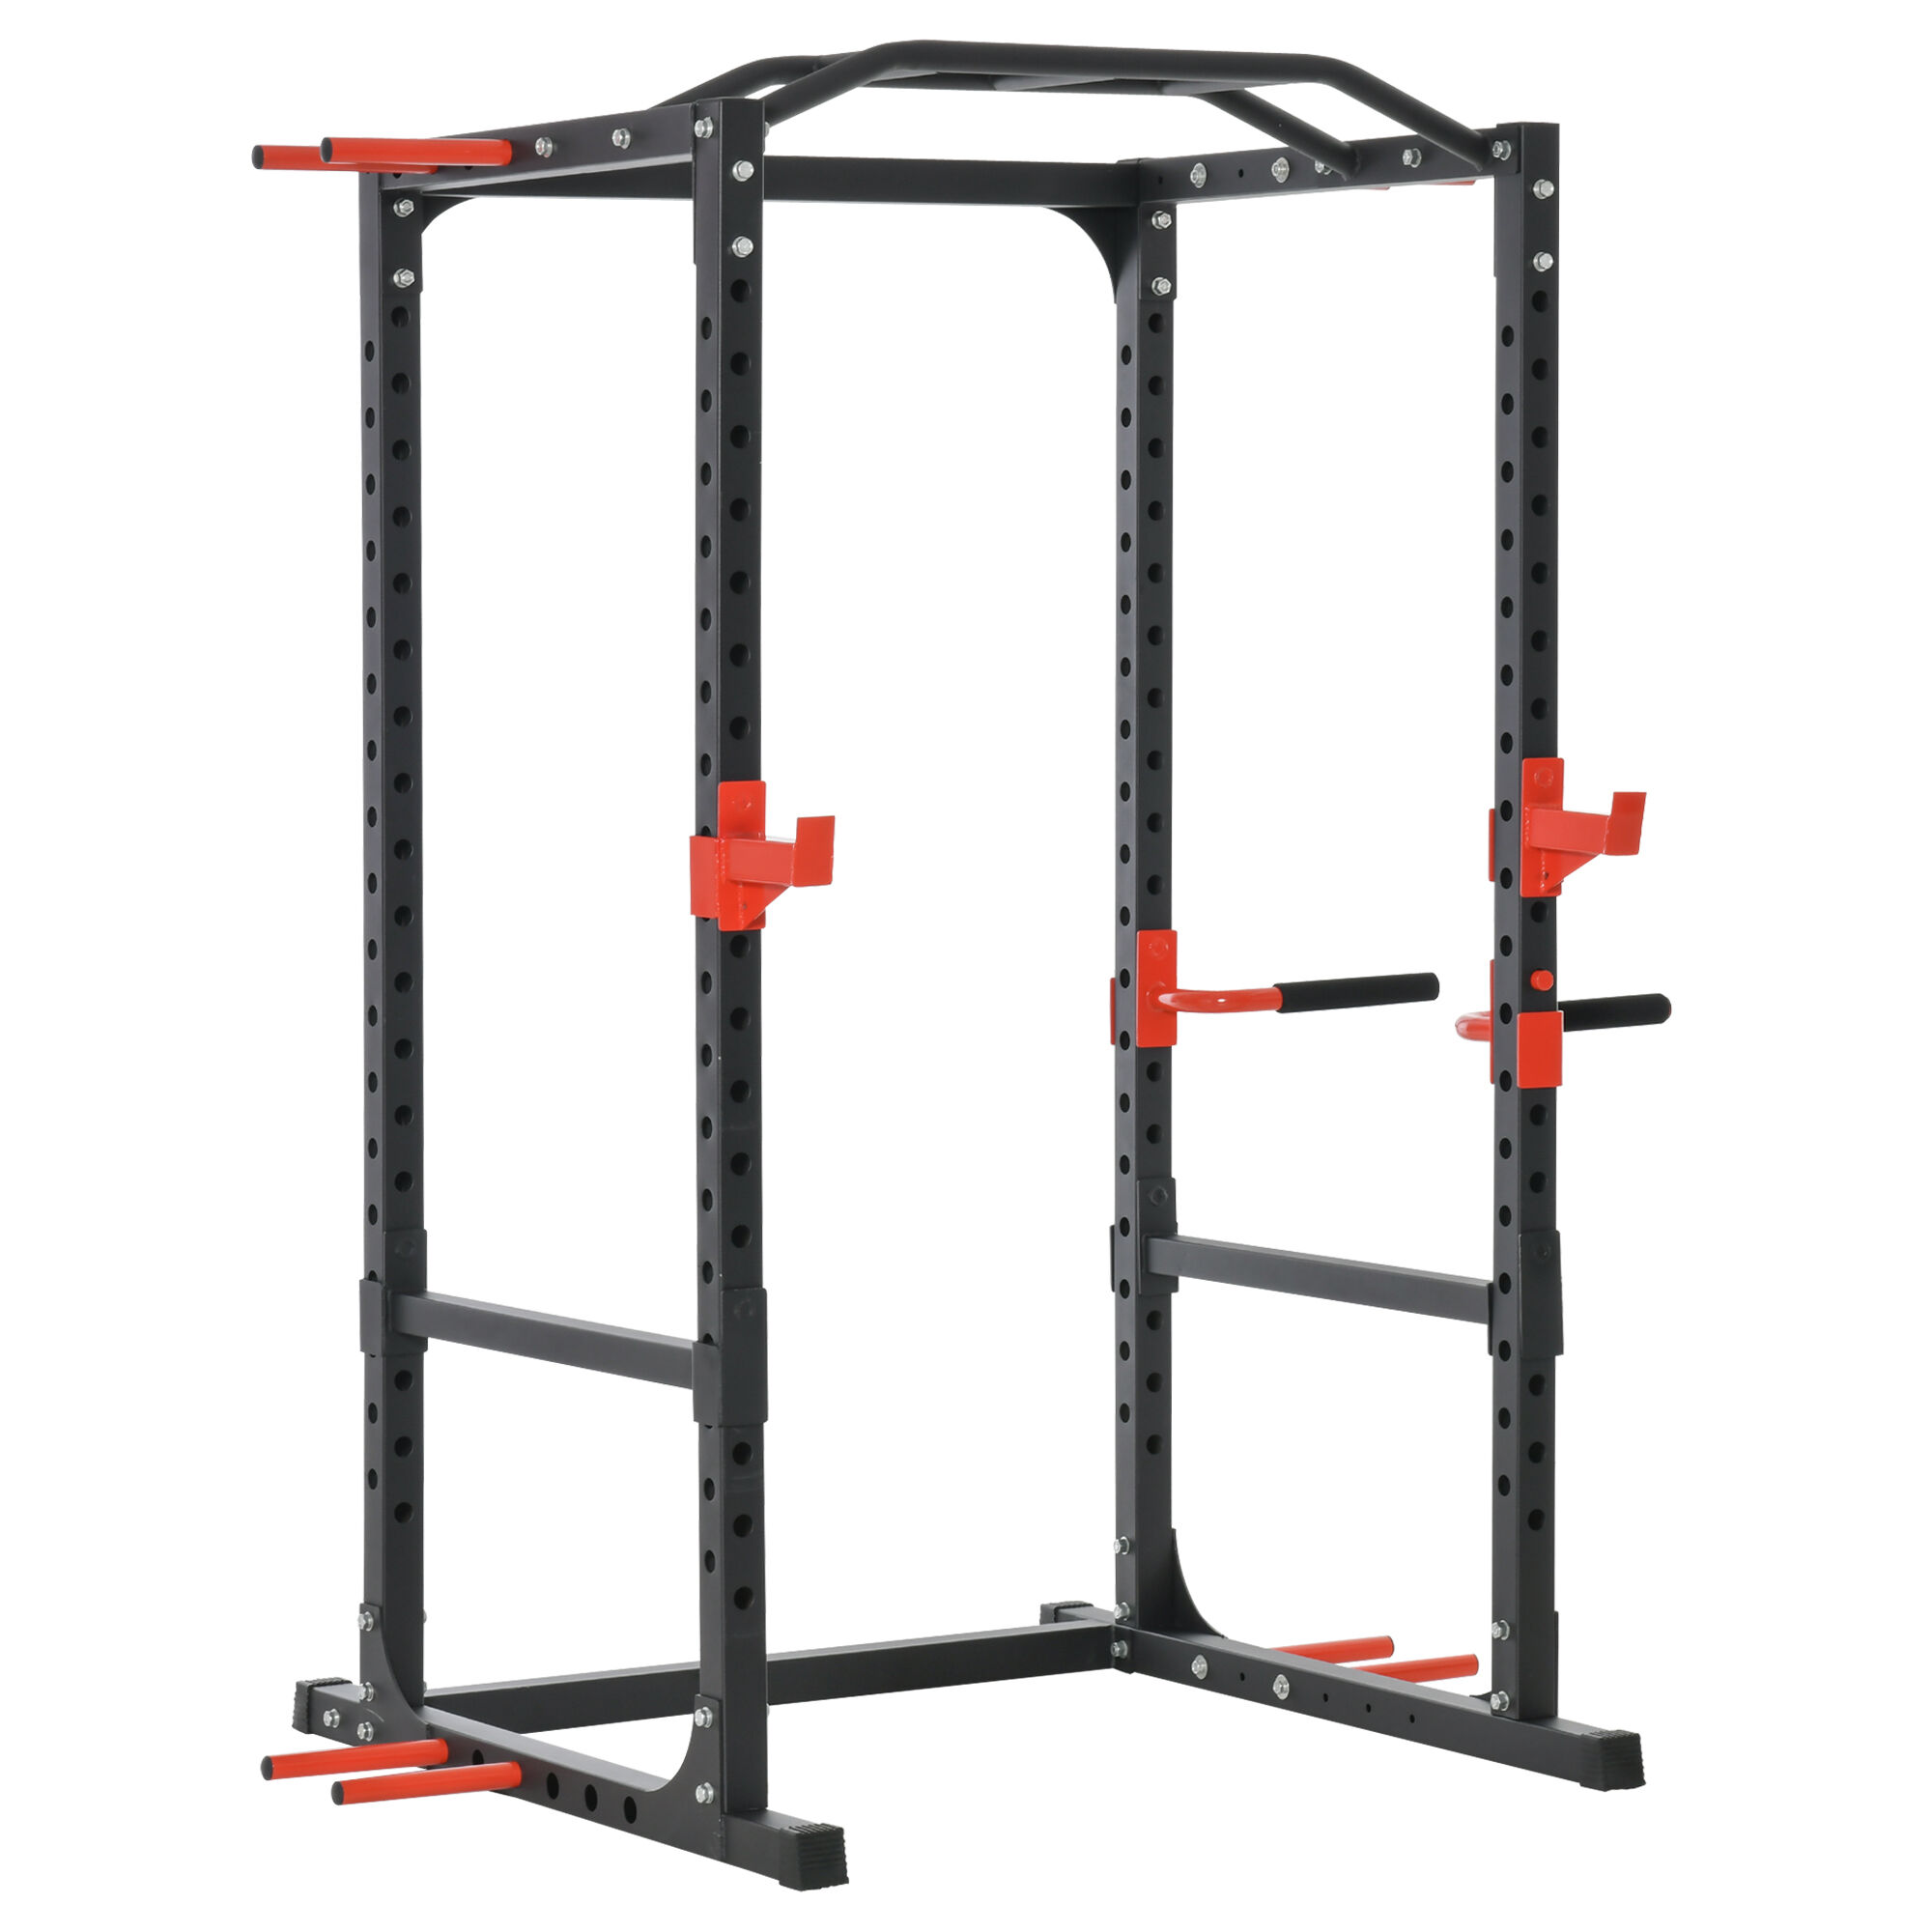 Soozier Power Tower Squat Cage Black Adjustable Multi-Function Home Gym Weightlifting Exercise Workout Station Strength Training   Aosom.com